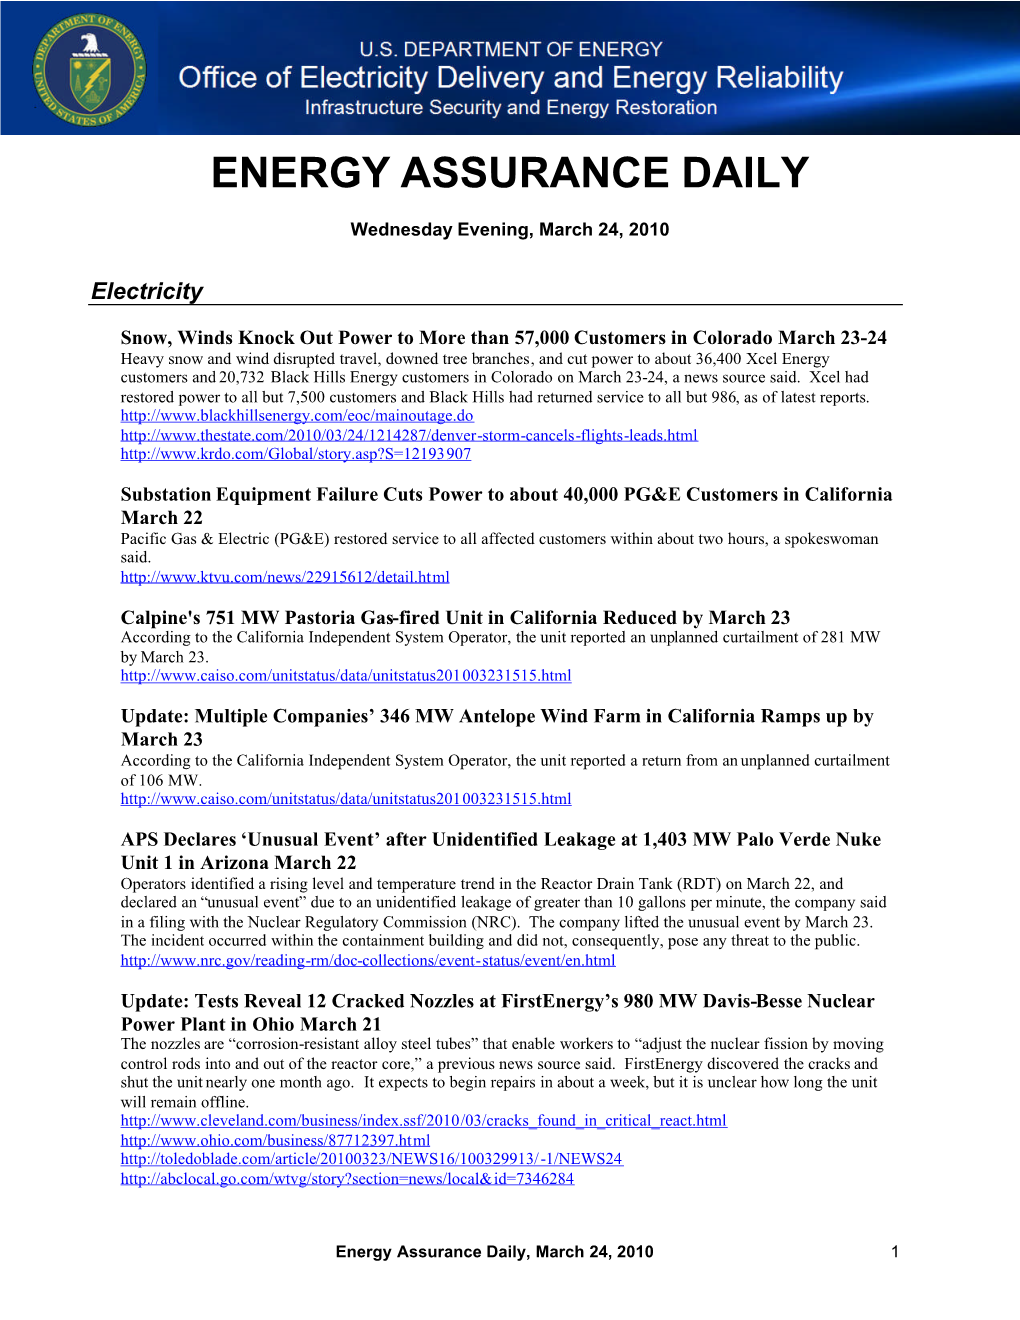 Energy Assurance Daily, March 24, 2010